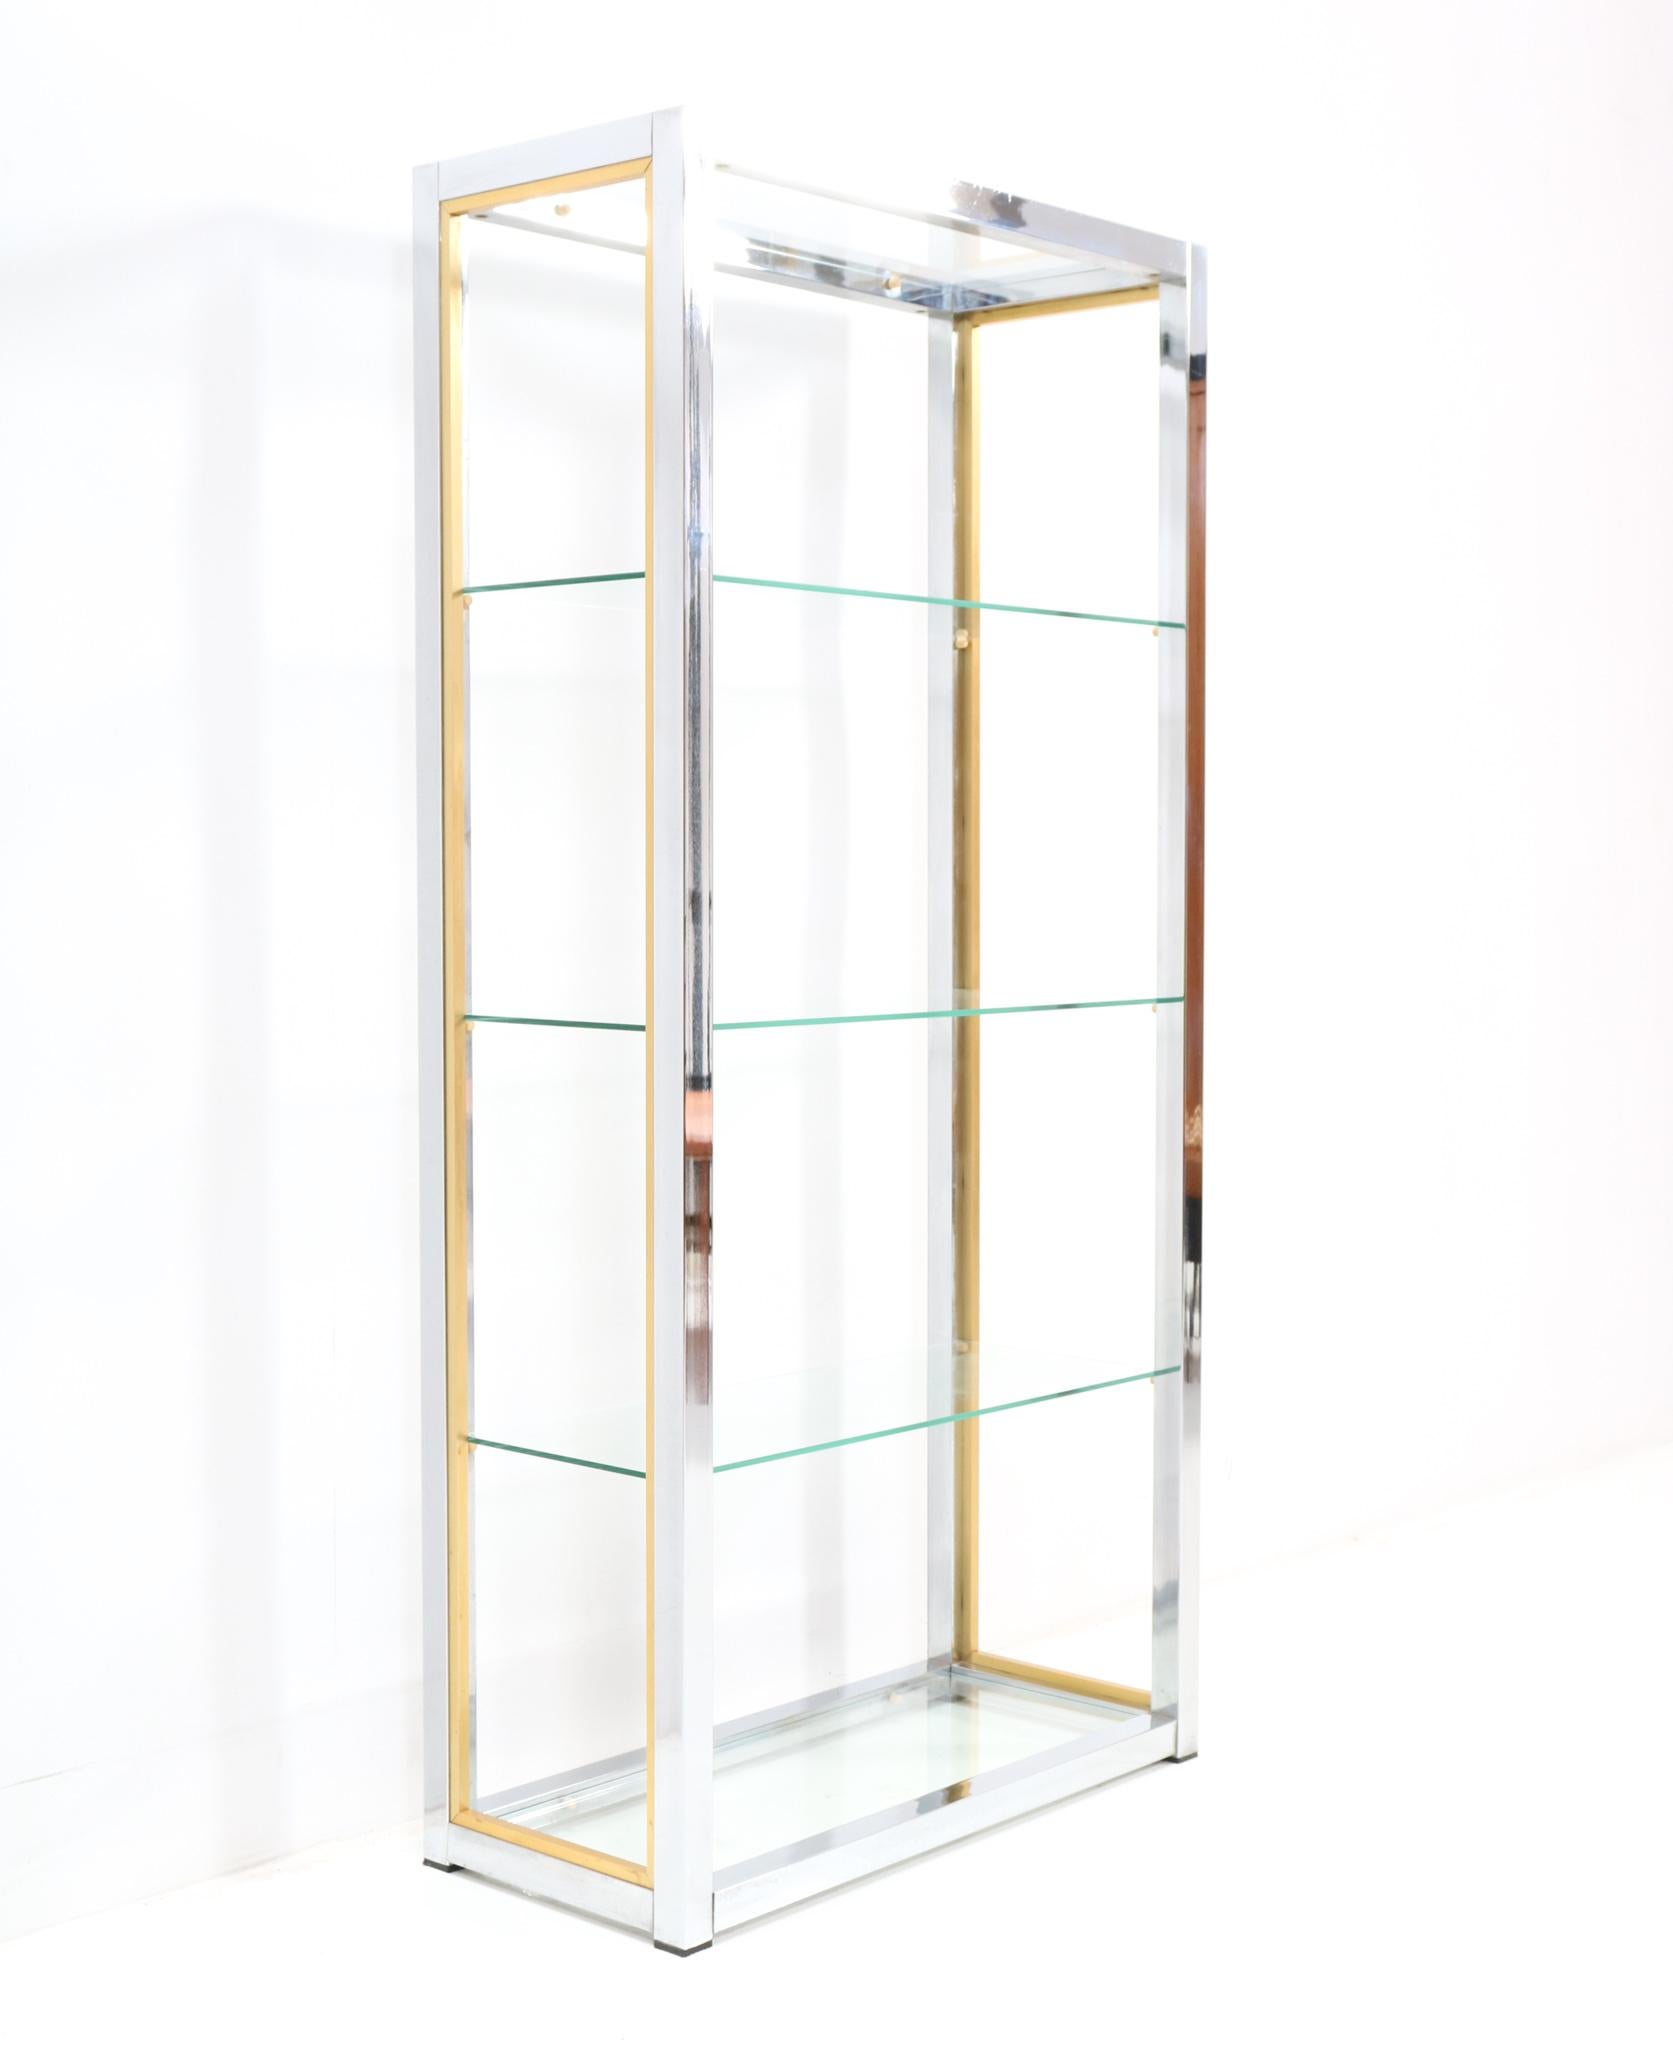 Stunning Hollywood Regency etagere or display piece.
Design by Renato Zevi.
Striking Italian design from the 1970s.
Original chrome and brass frame with five glass shelves.
This wonderful Italian etagere or display piece by Renato Zevi